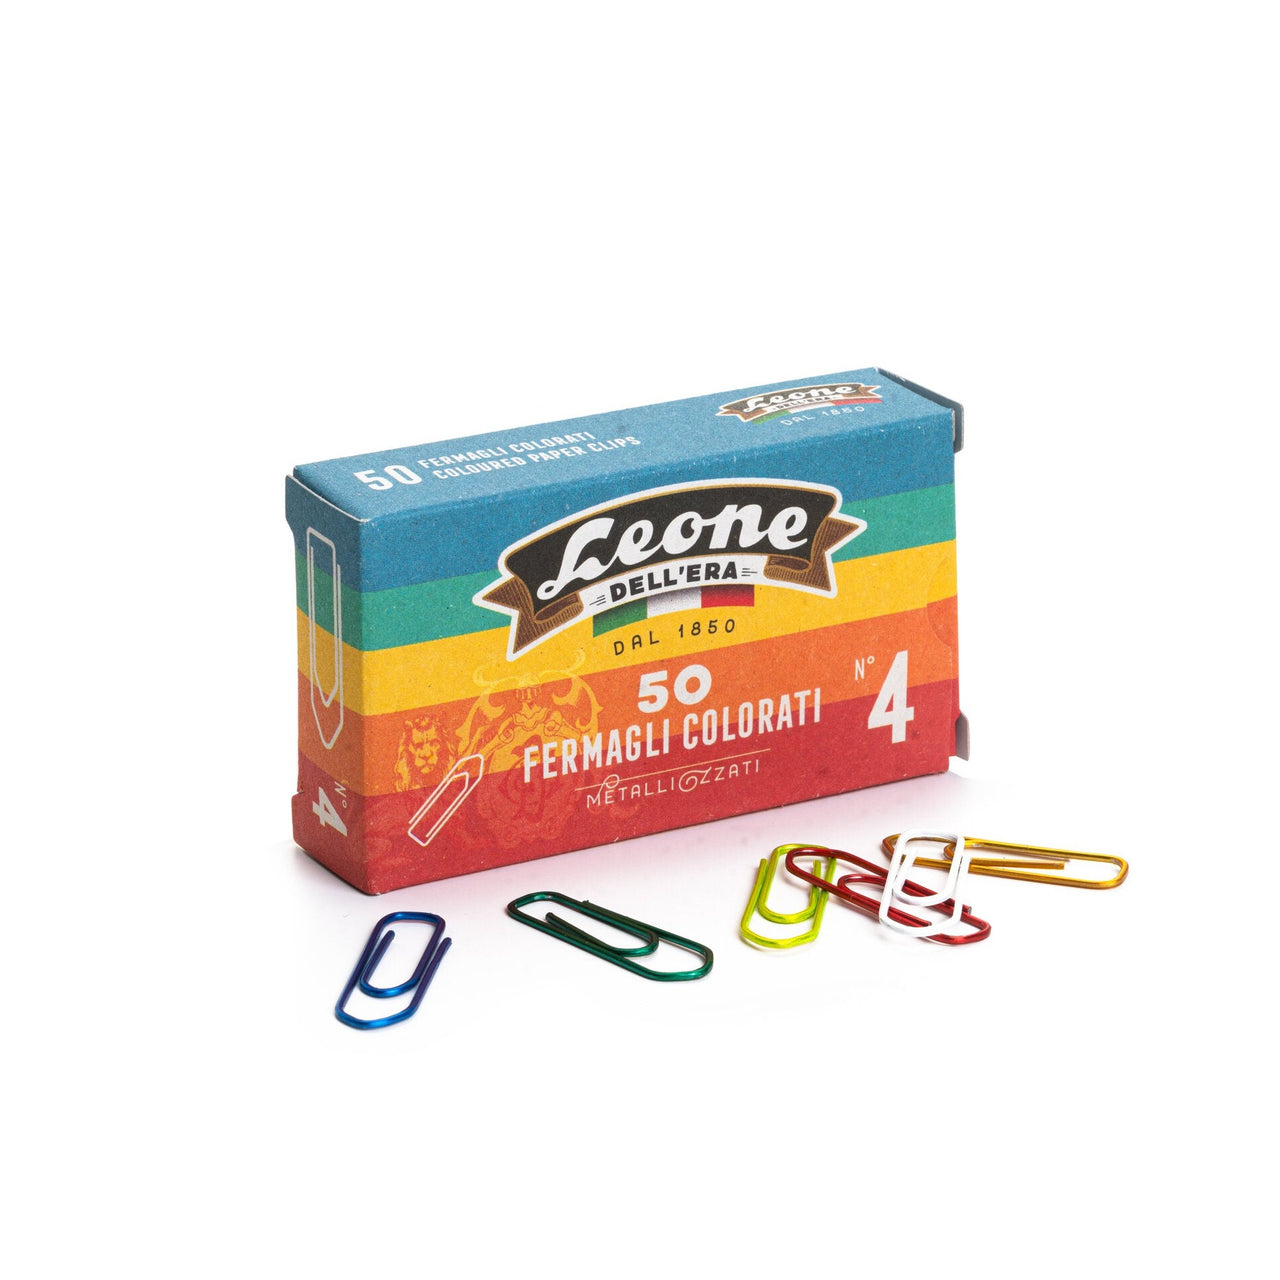 Mixed Metallic Paperclips No. 4. - 50 count